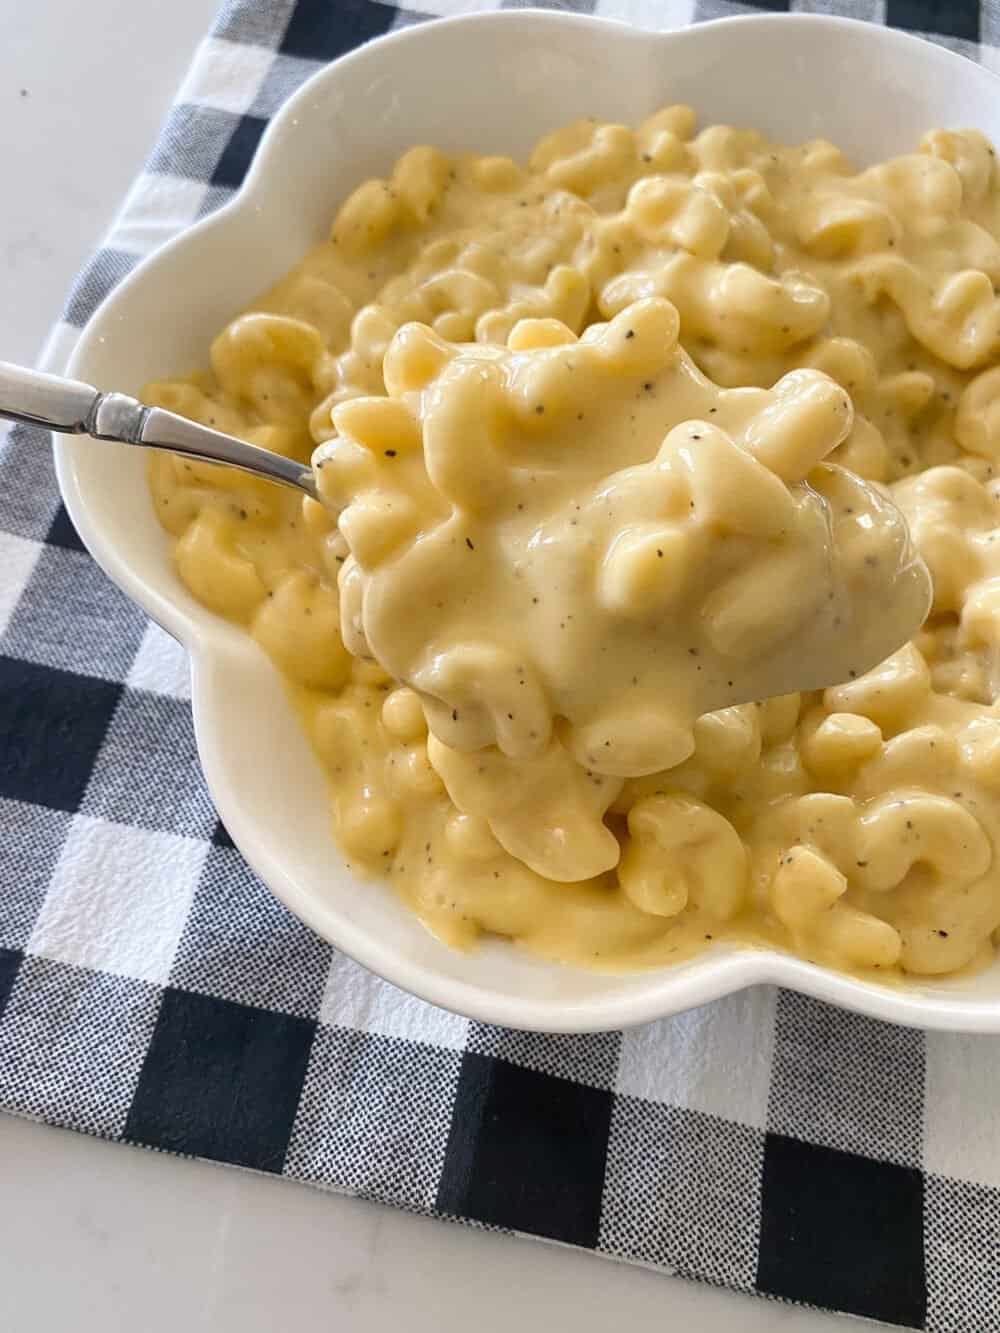 Can You Use Buttermilk Instead Of Milk In Mac And Cheese How To Make The Perfect Mac And Cheese Best Mac Cheese Recipe